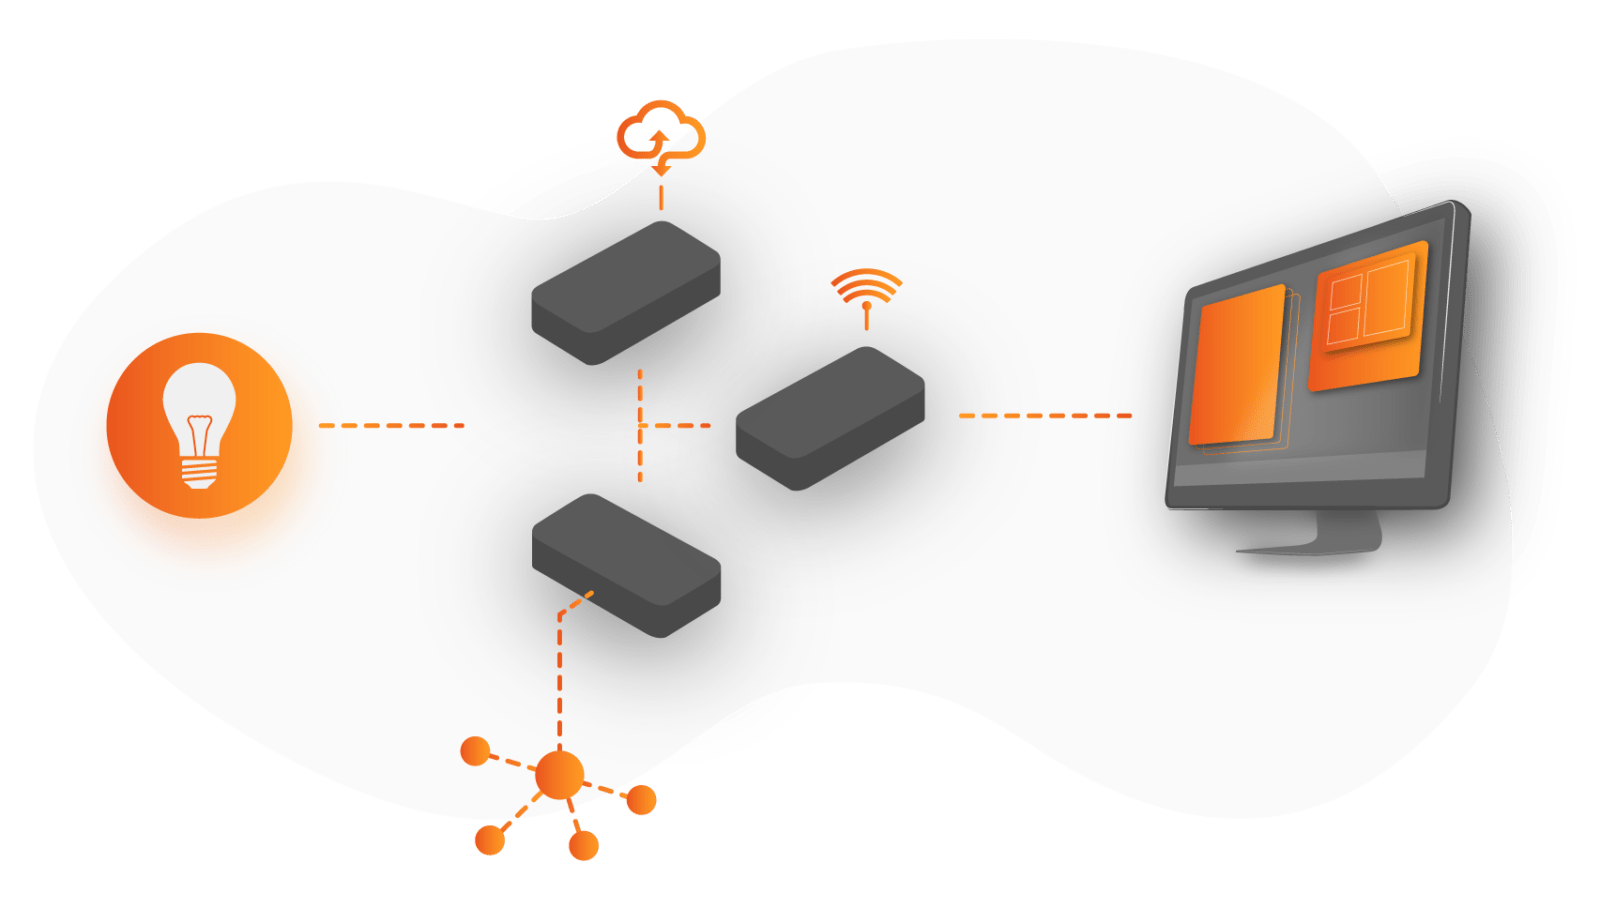 Graphical illustration of an IoT system. On one end, there is a light bulb illustrated in an orange circle with a line connecting to three boxes representing the cloud, network, and databases. From these boxes, there is an orange line leading to a computer representing the application where data is displayed.